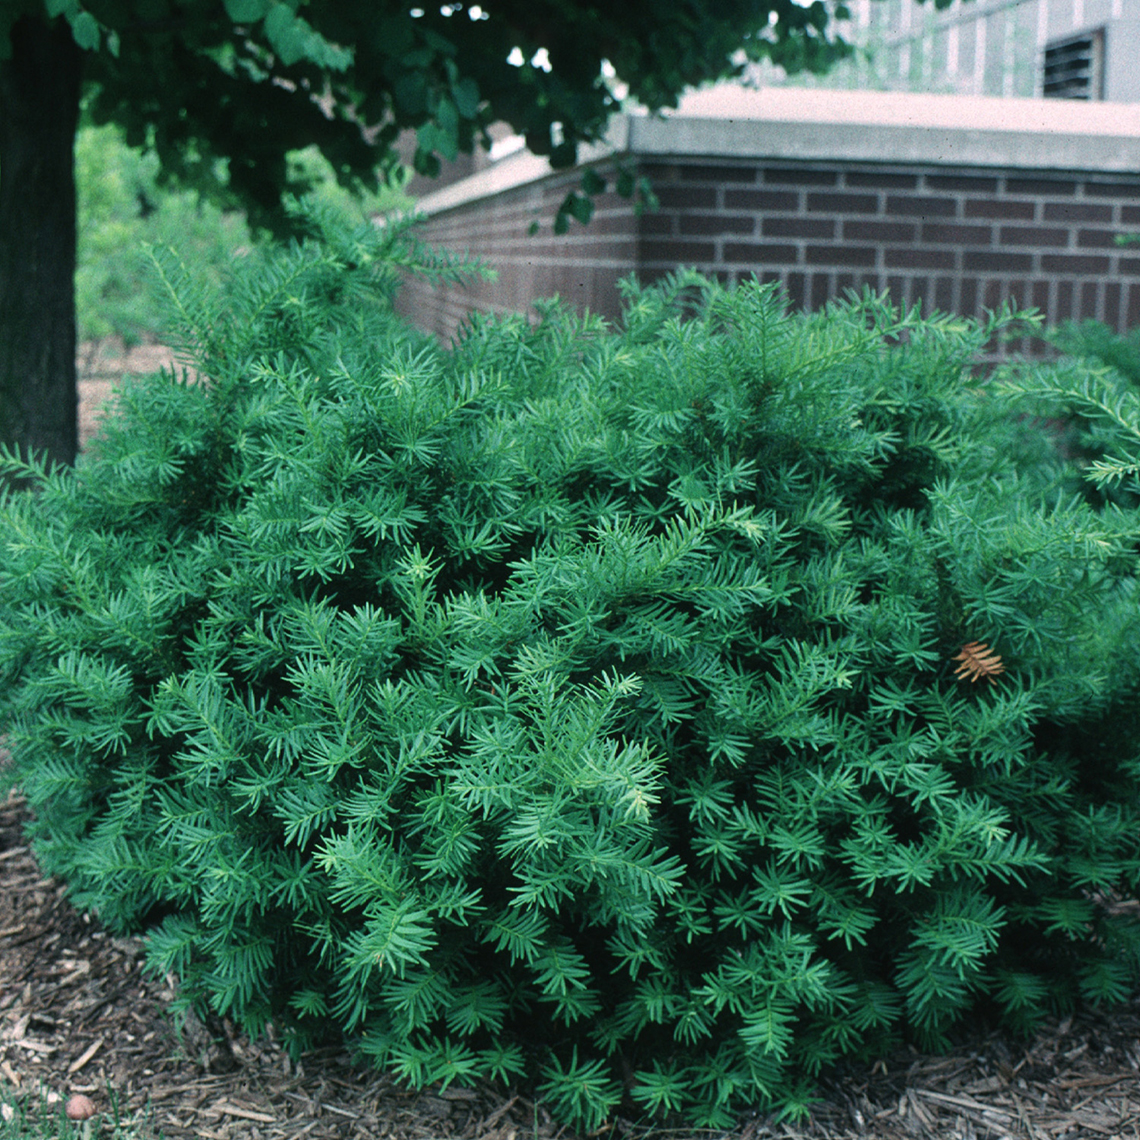 Densiformis yew growing with its characteristic short rounded habit in a landscape